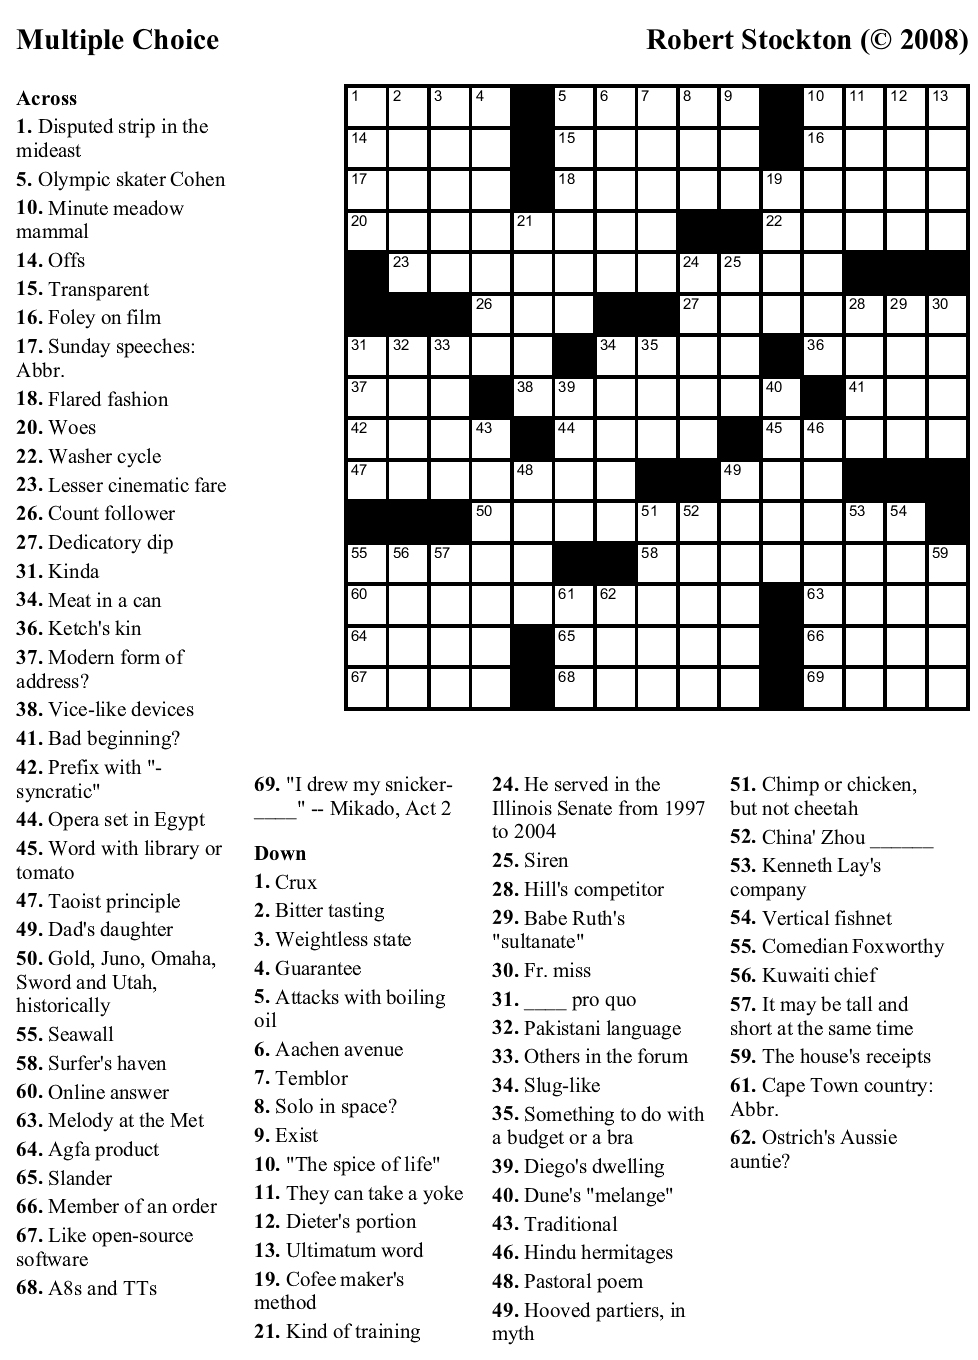 Printable Newspaper Crossword Puzzles For Free - Printable 360 Degree - Printable Newspaper Crossword Puzzles For Free